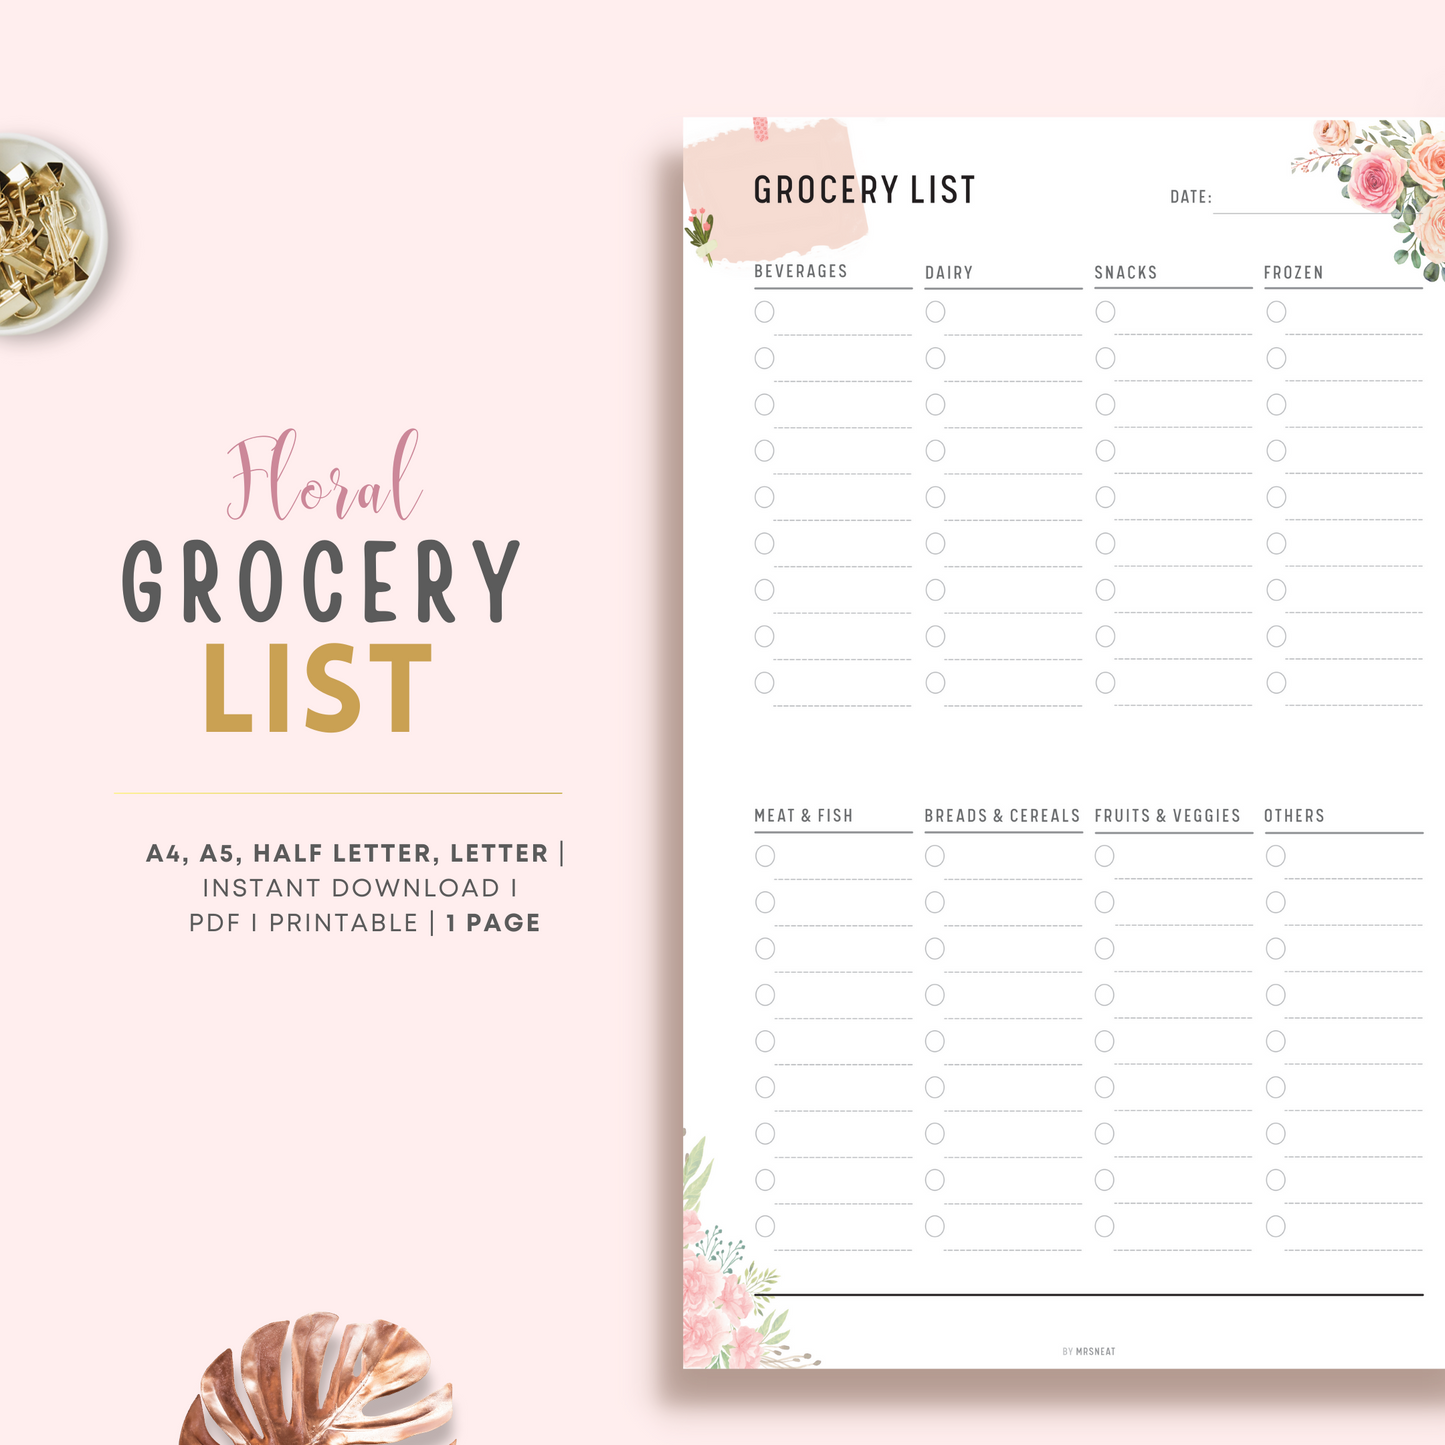 Beautiful and Cute Grocery List Printable Planner in Minimalist Design with 8 shopping categories